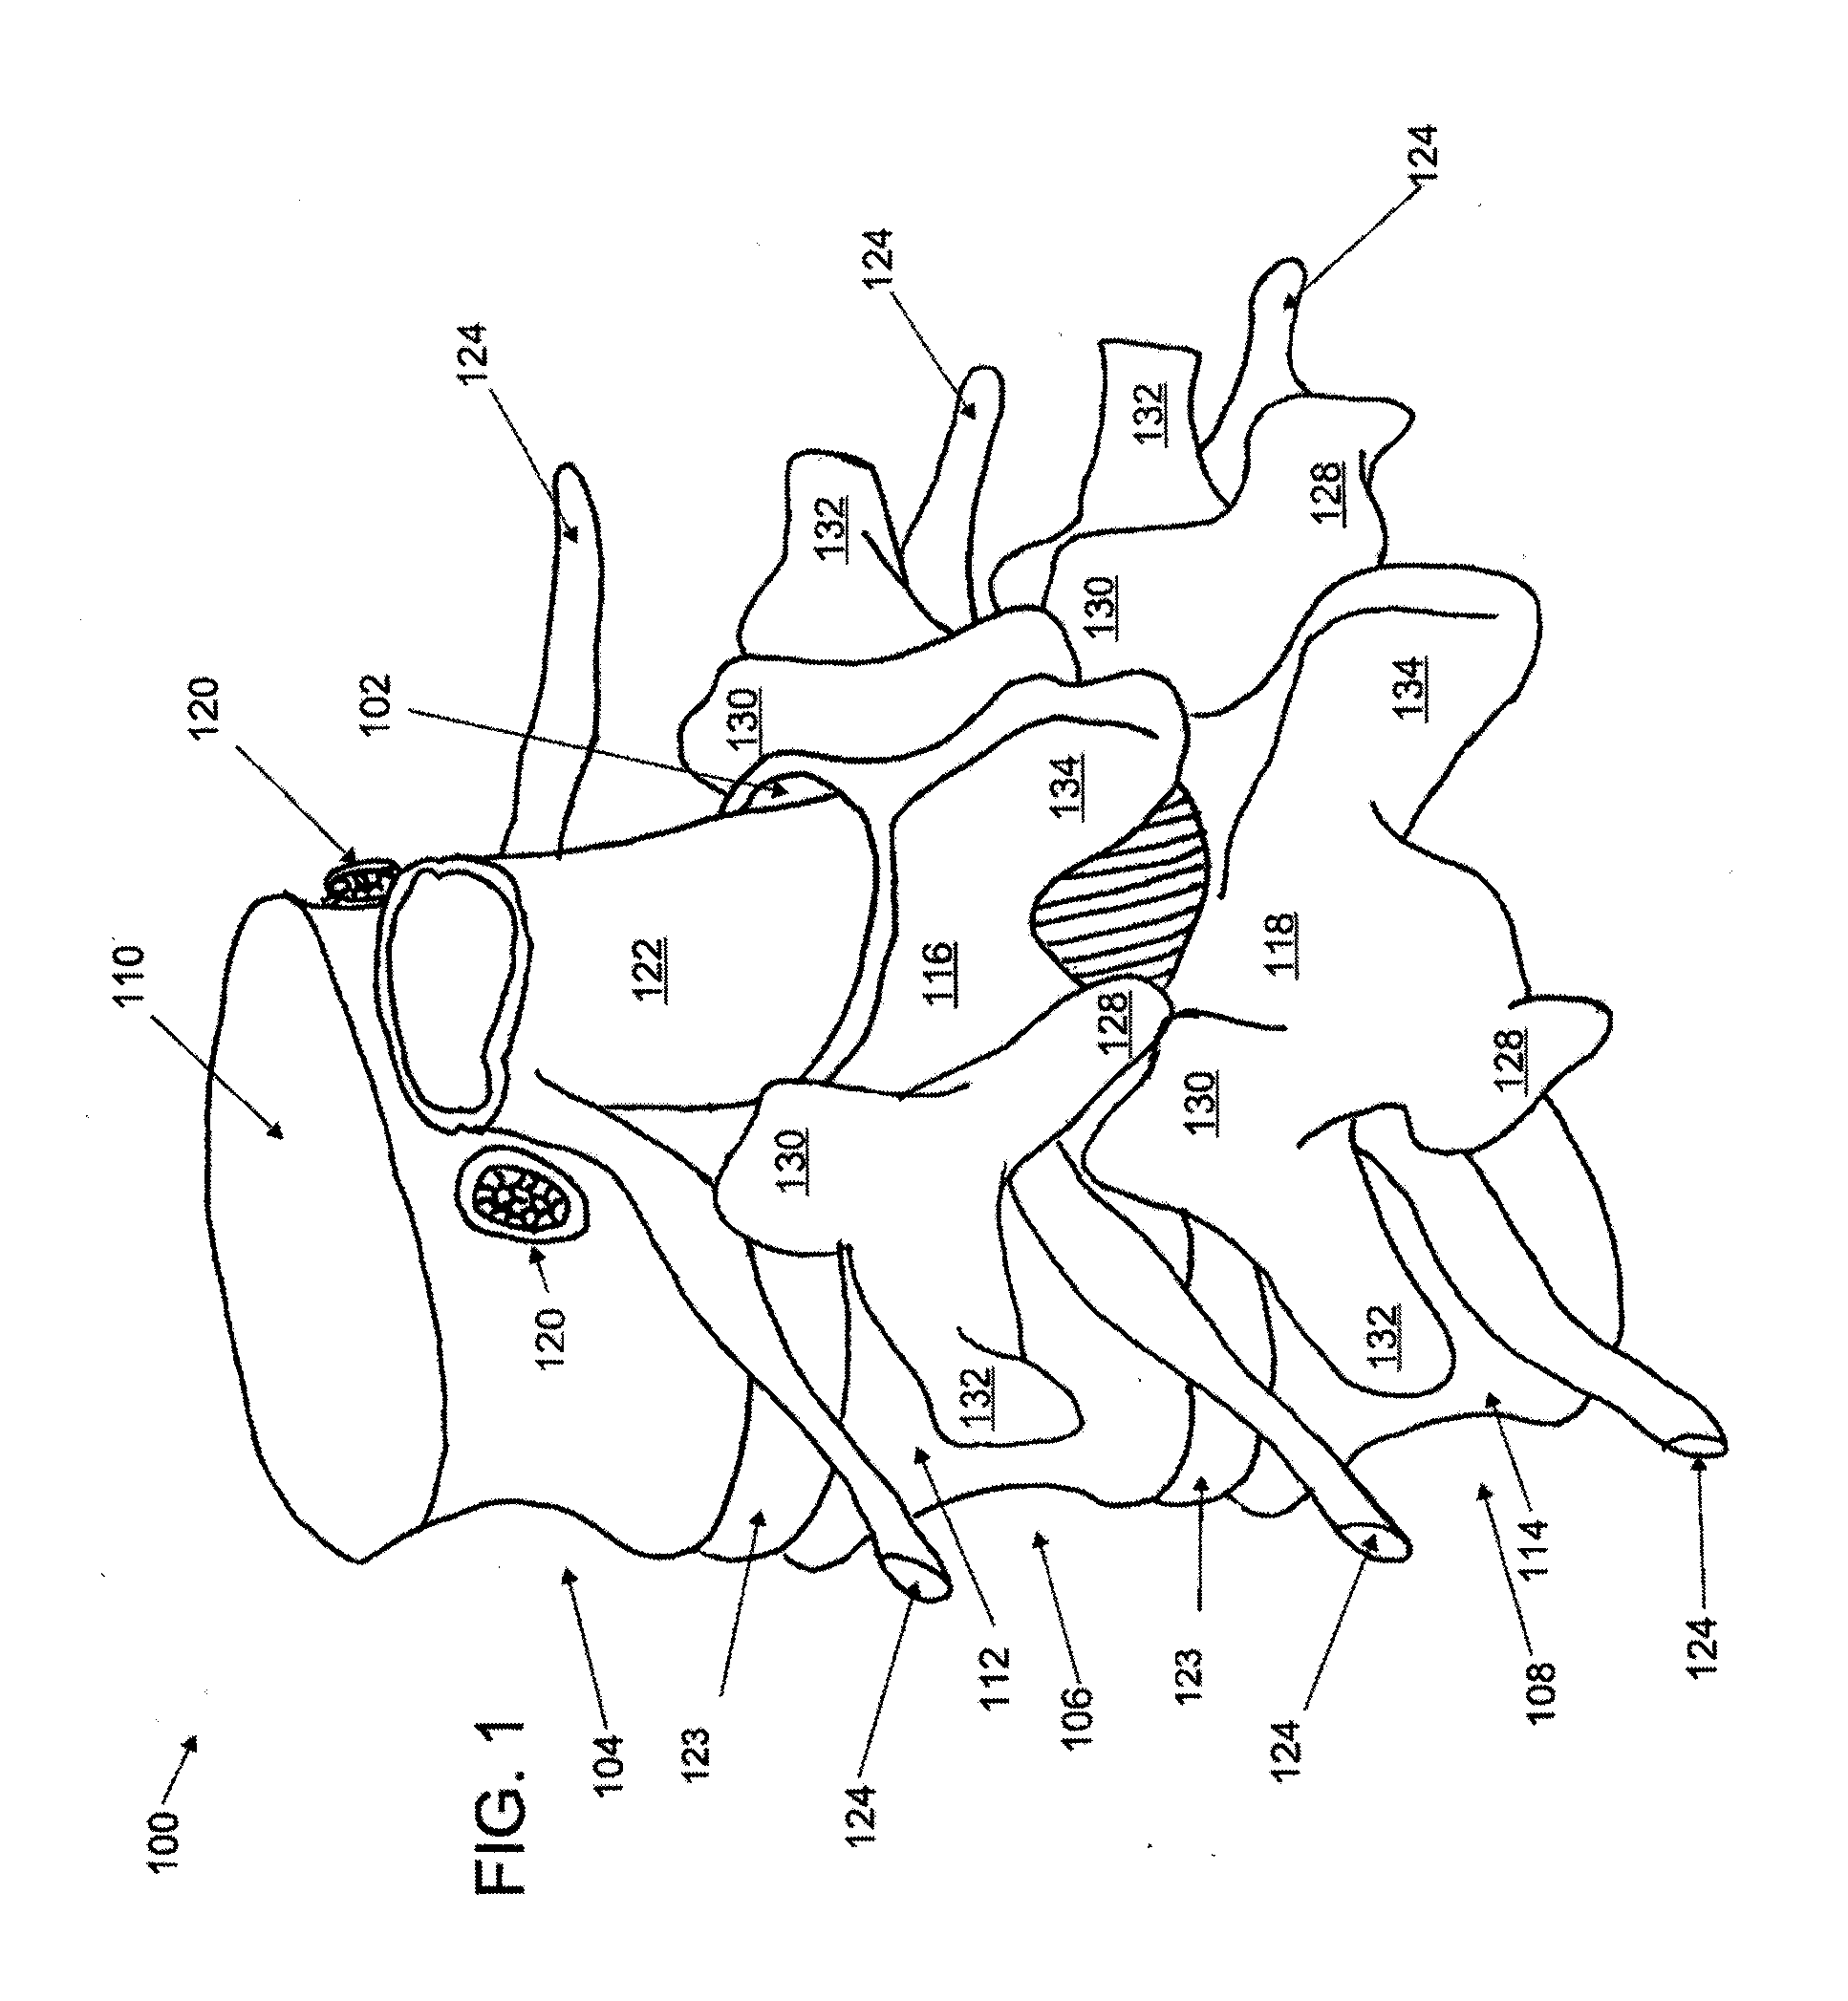 Articulating tissue removal systems and methods